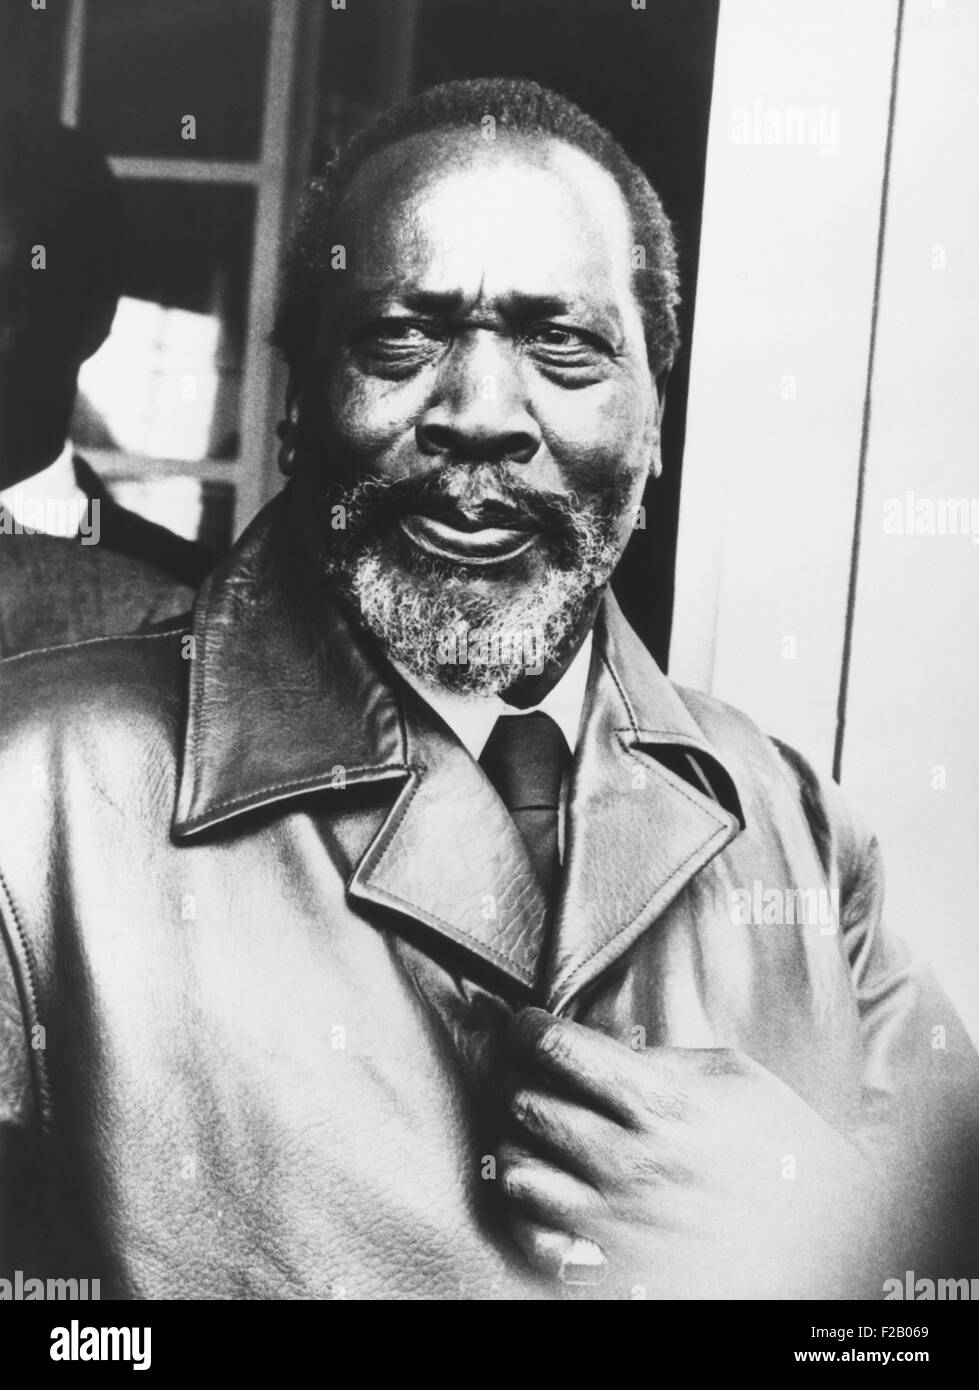 Jome Kenyatta after he was released from 7 years in prison on August 14, 1961. He was one of the 'Kapenguria Six,' charged in 1952 by British colonial government of 'managing and being a member' of the rebellious Mau Mau Society. Kenyatta's participation in the murderous Mau Mau movement remains unproven. (CSU 2015 9 682) Stock Photo